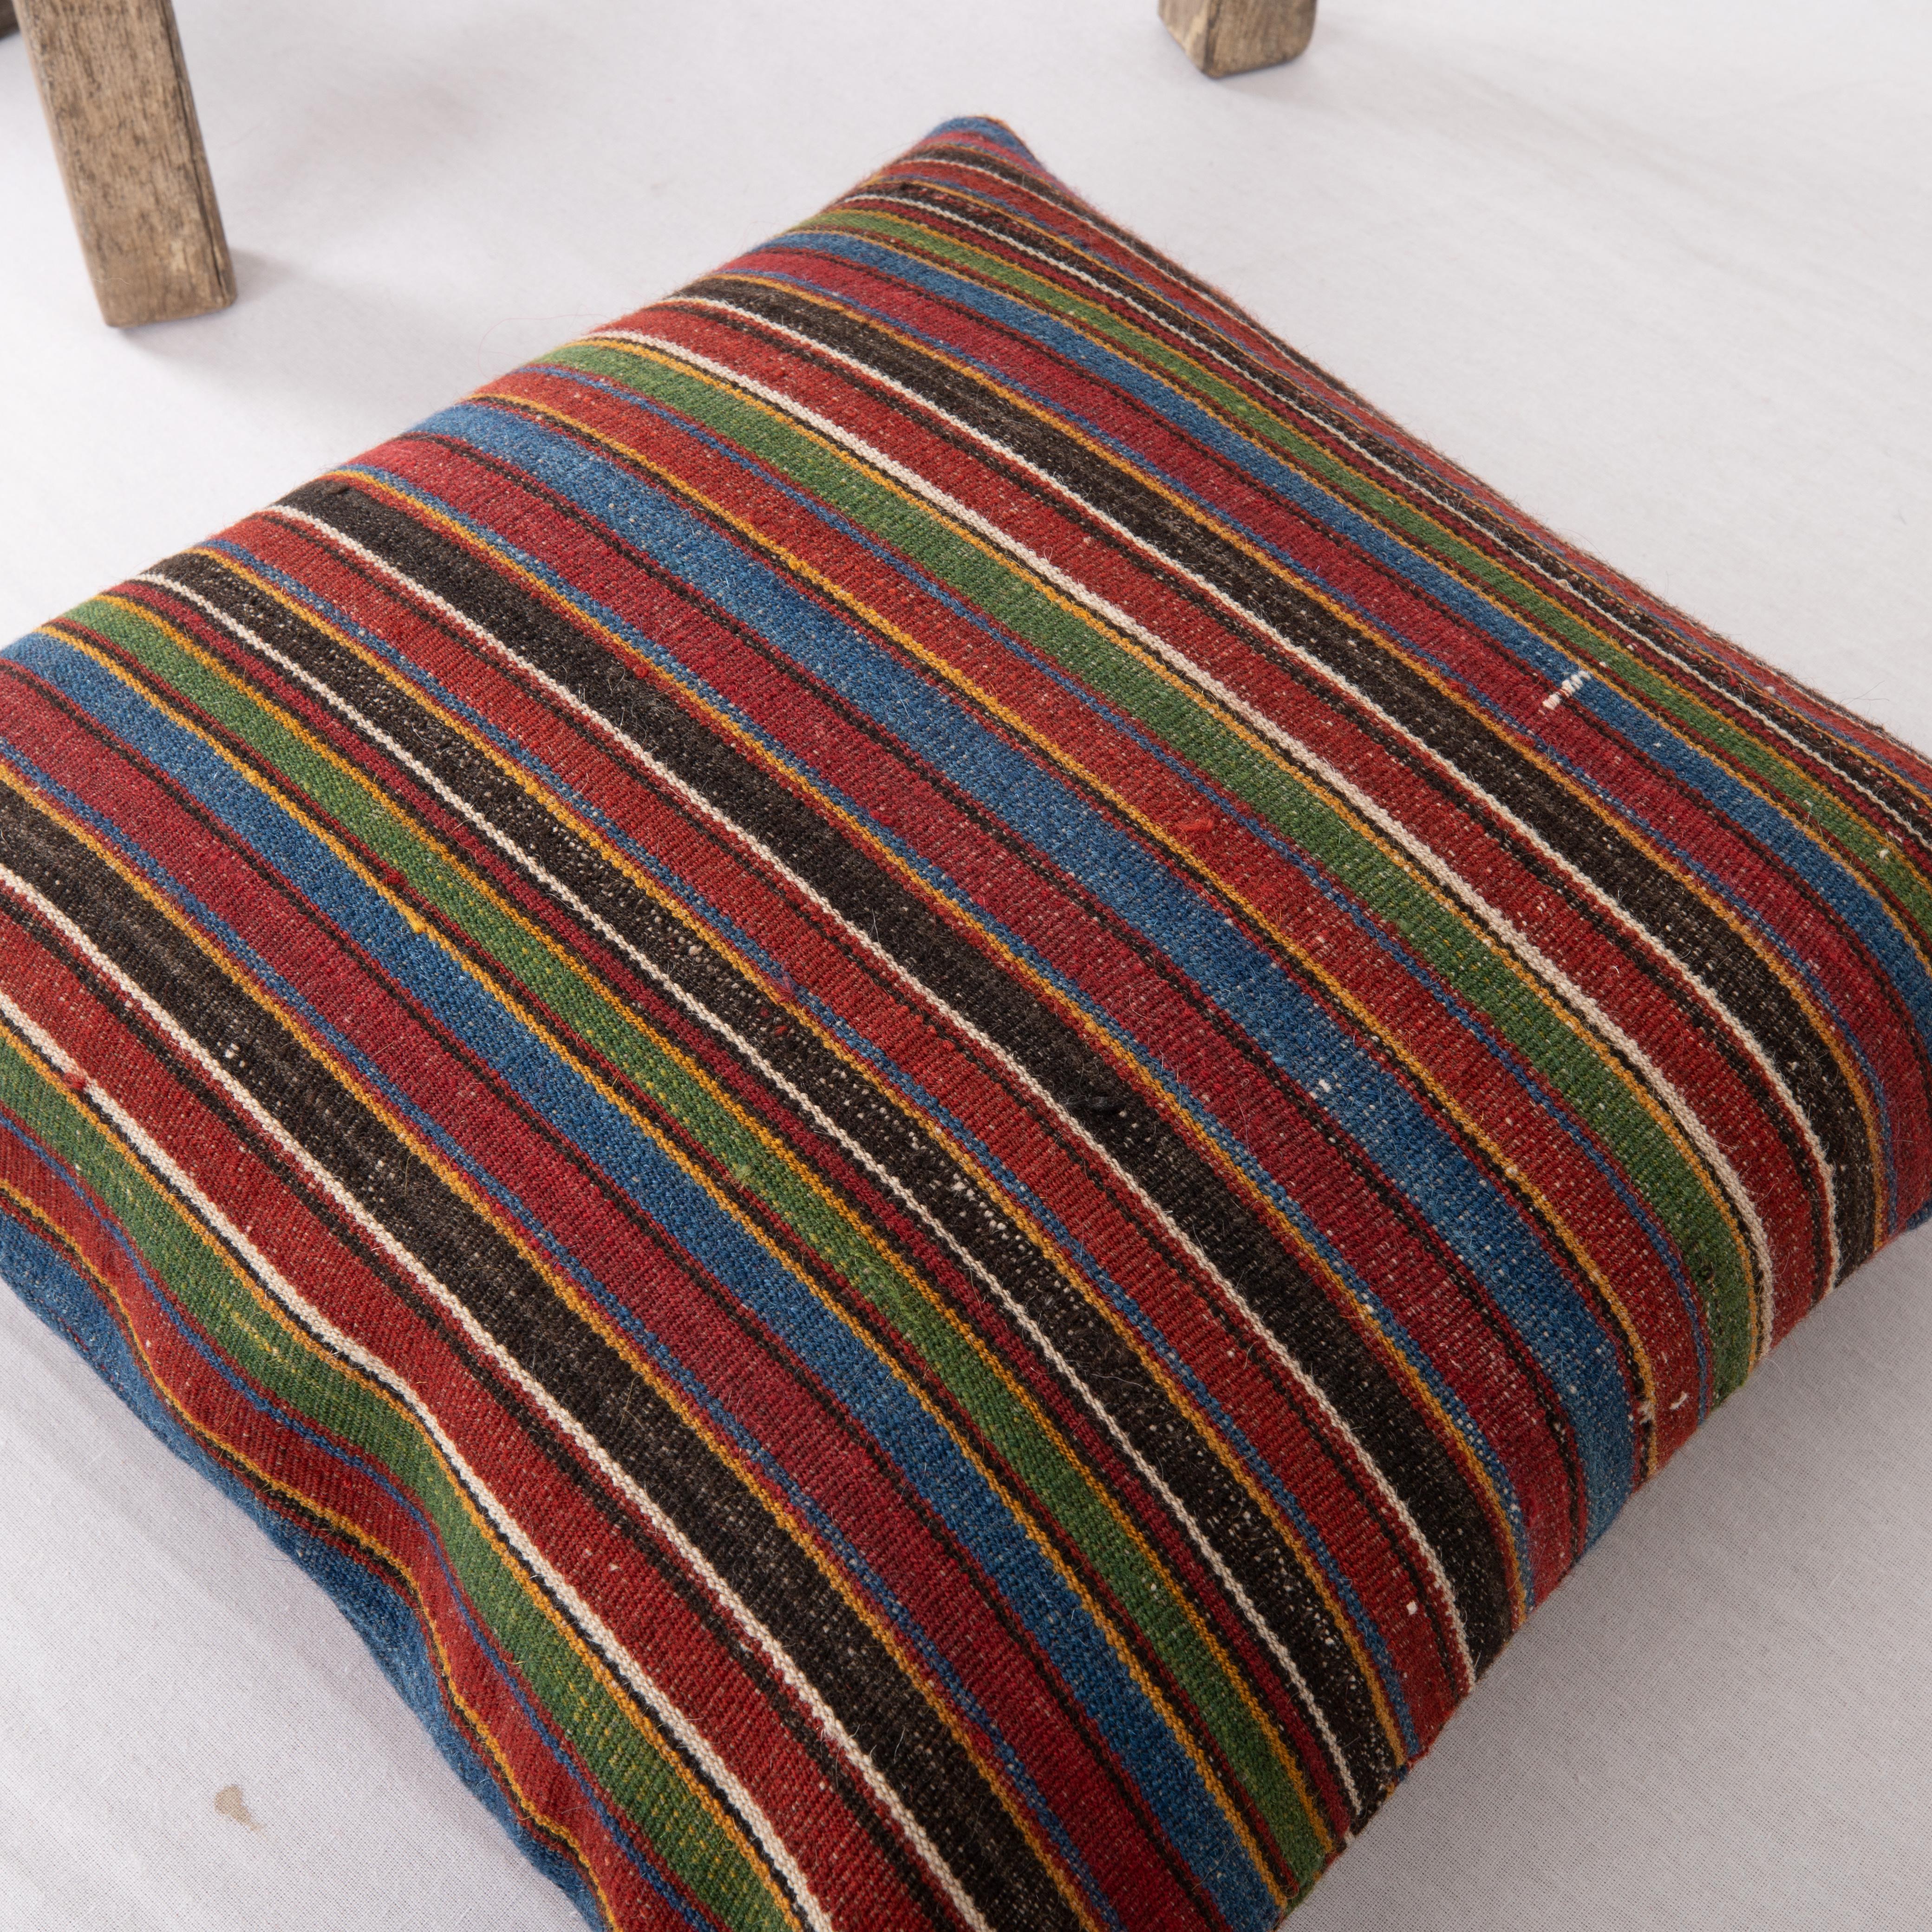 Hand-Woven Double Sided Kilim Pillow Cover Made From an Antique Kilim For Sale